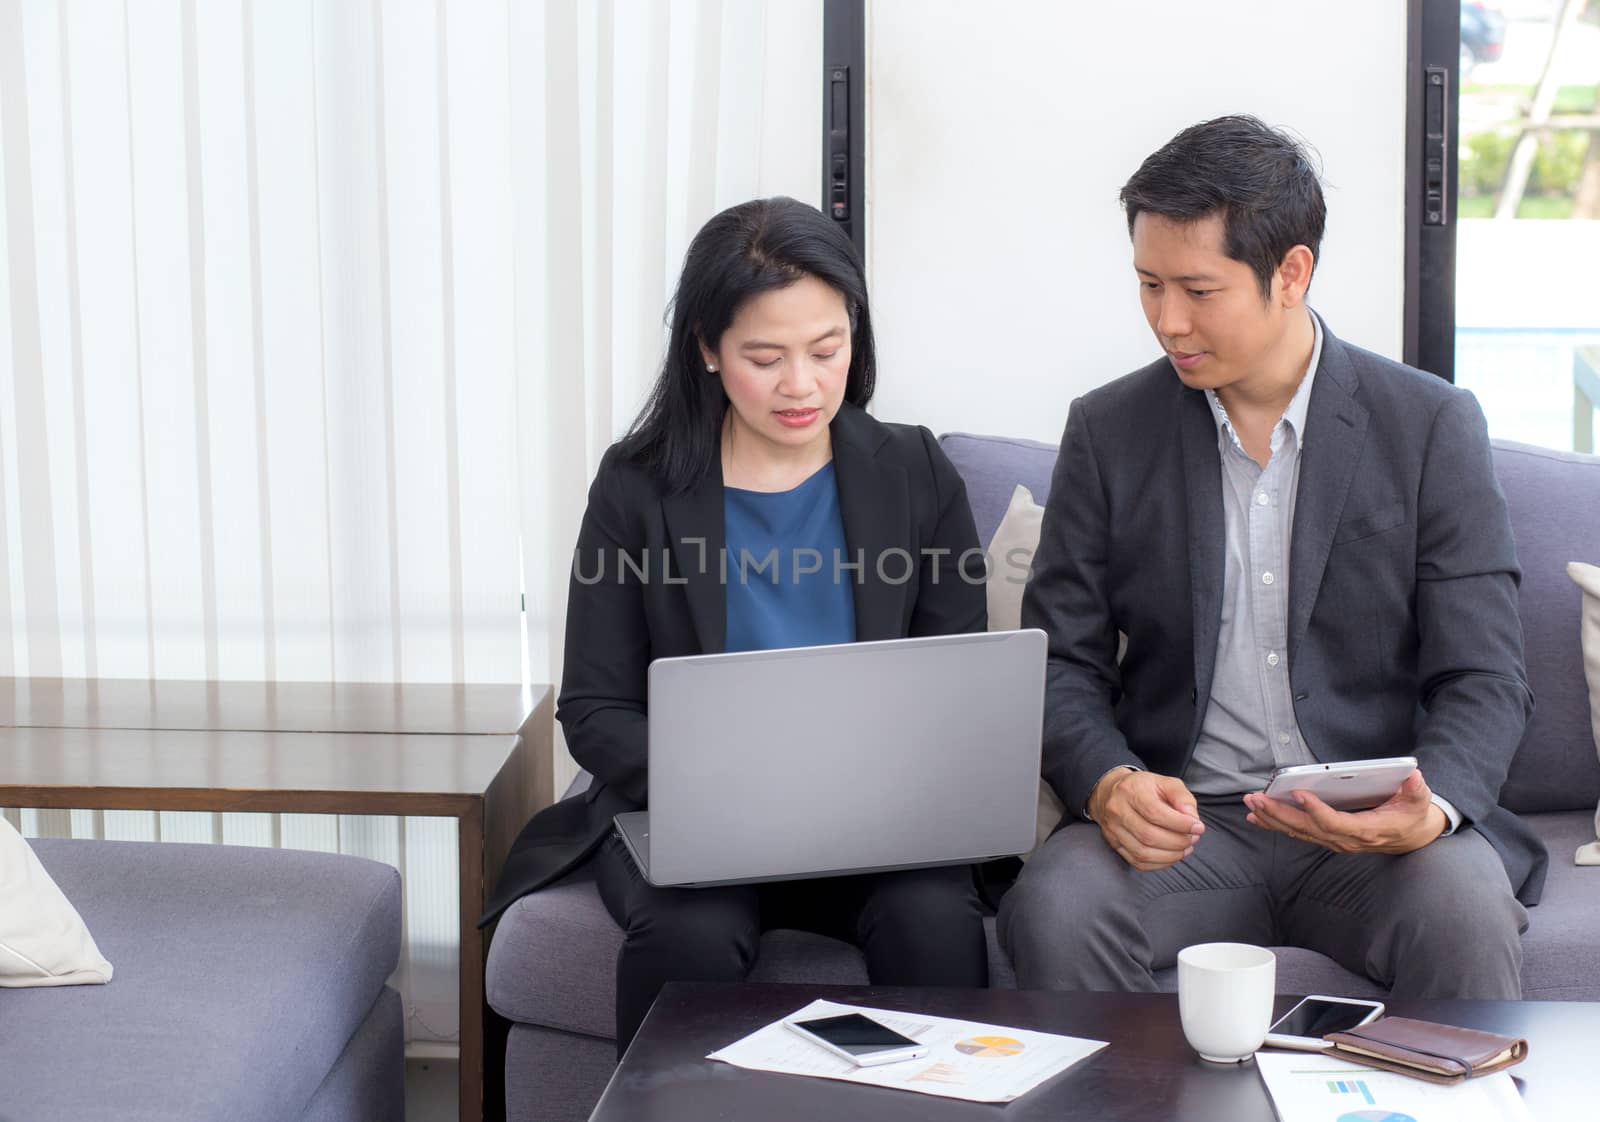 Team of business two people working together on a laptop with during a meeting sitting around a table.